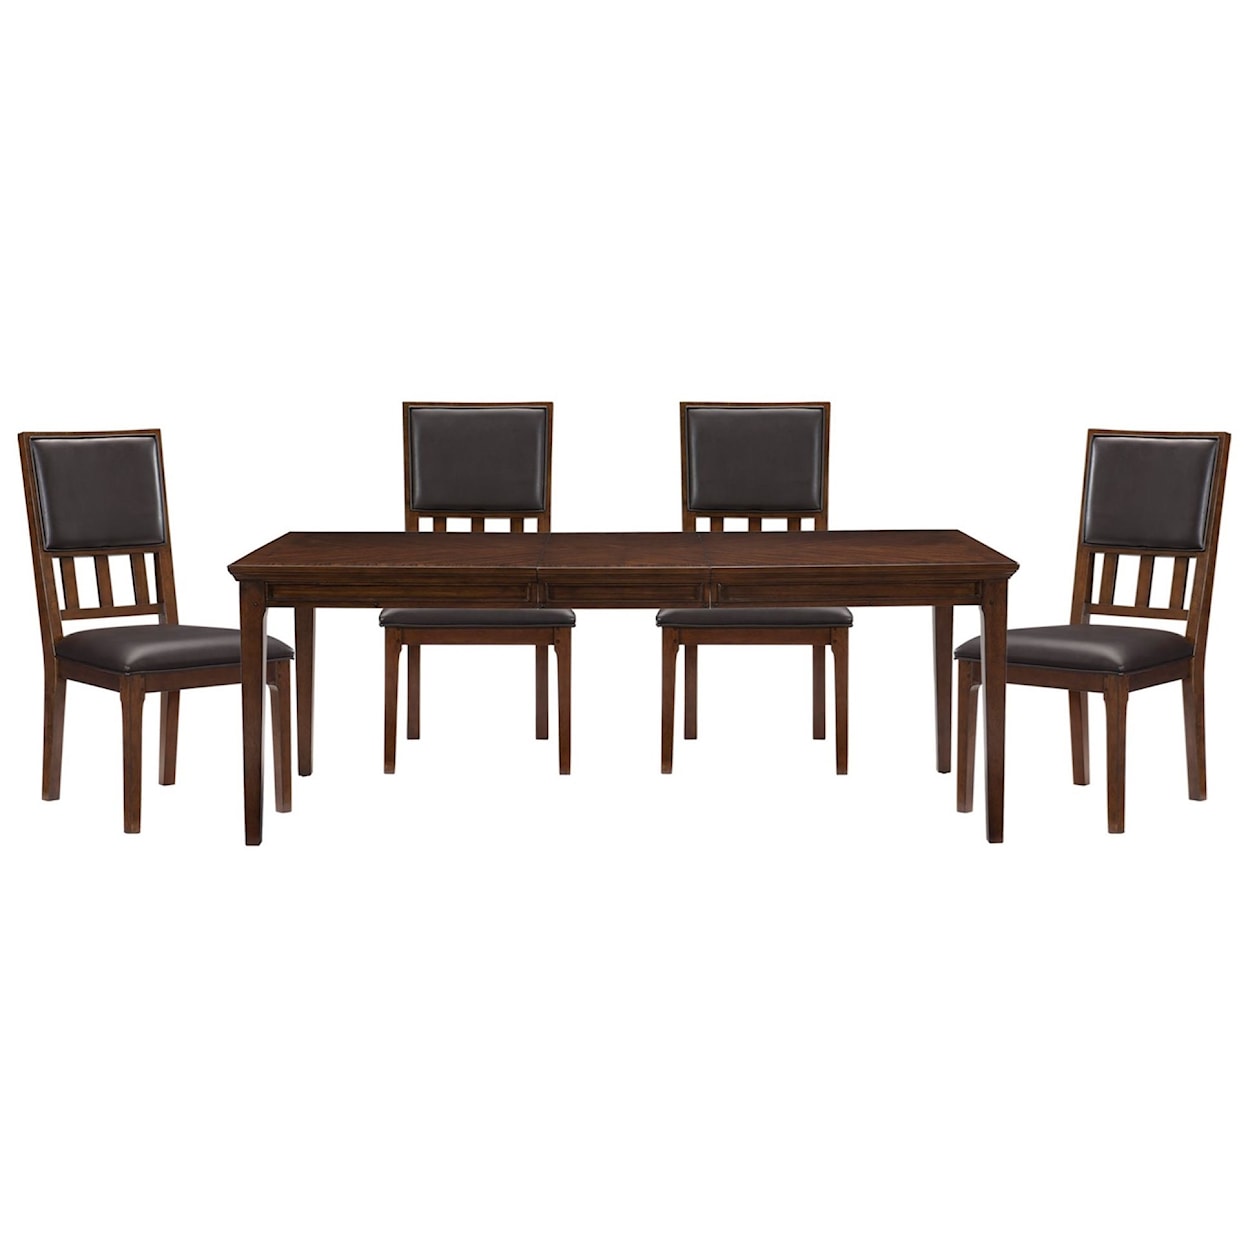 Homelegance Frazier Park 5-Piece Table and Chair Set